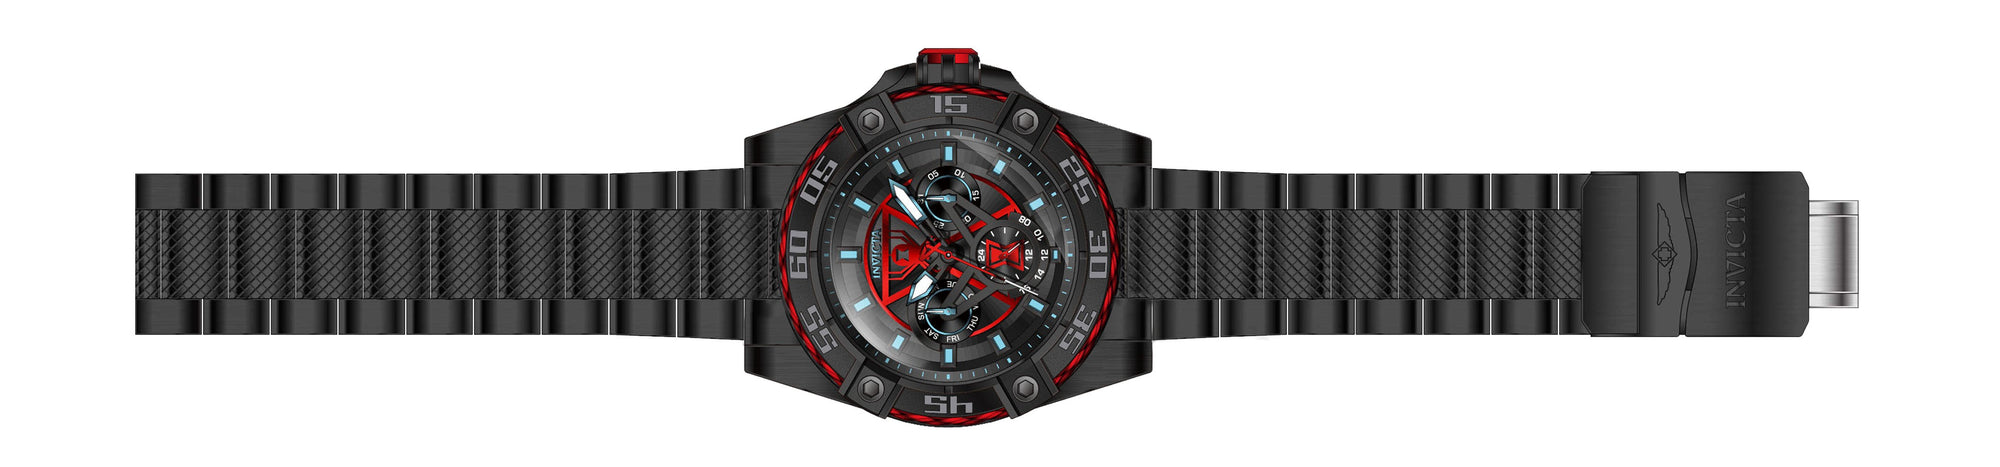 Band for Invicta Marvel 27297